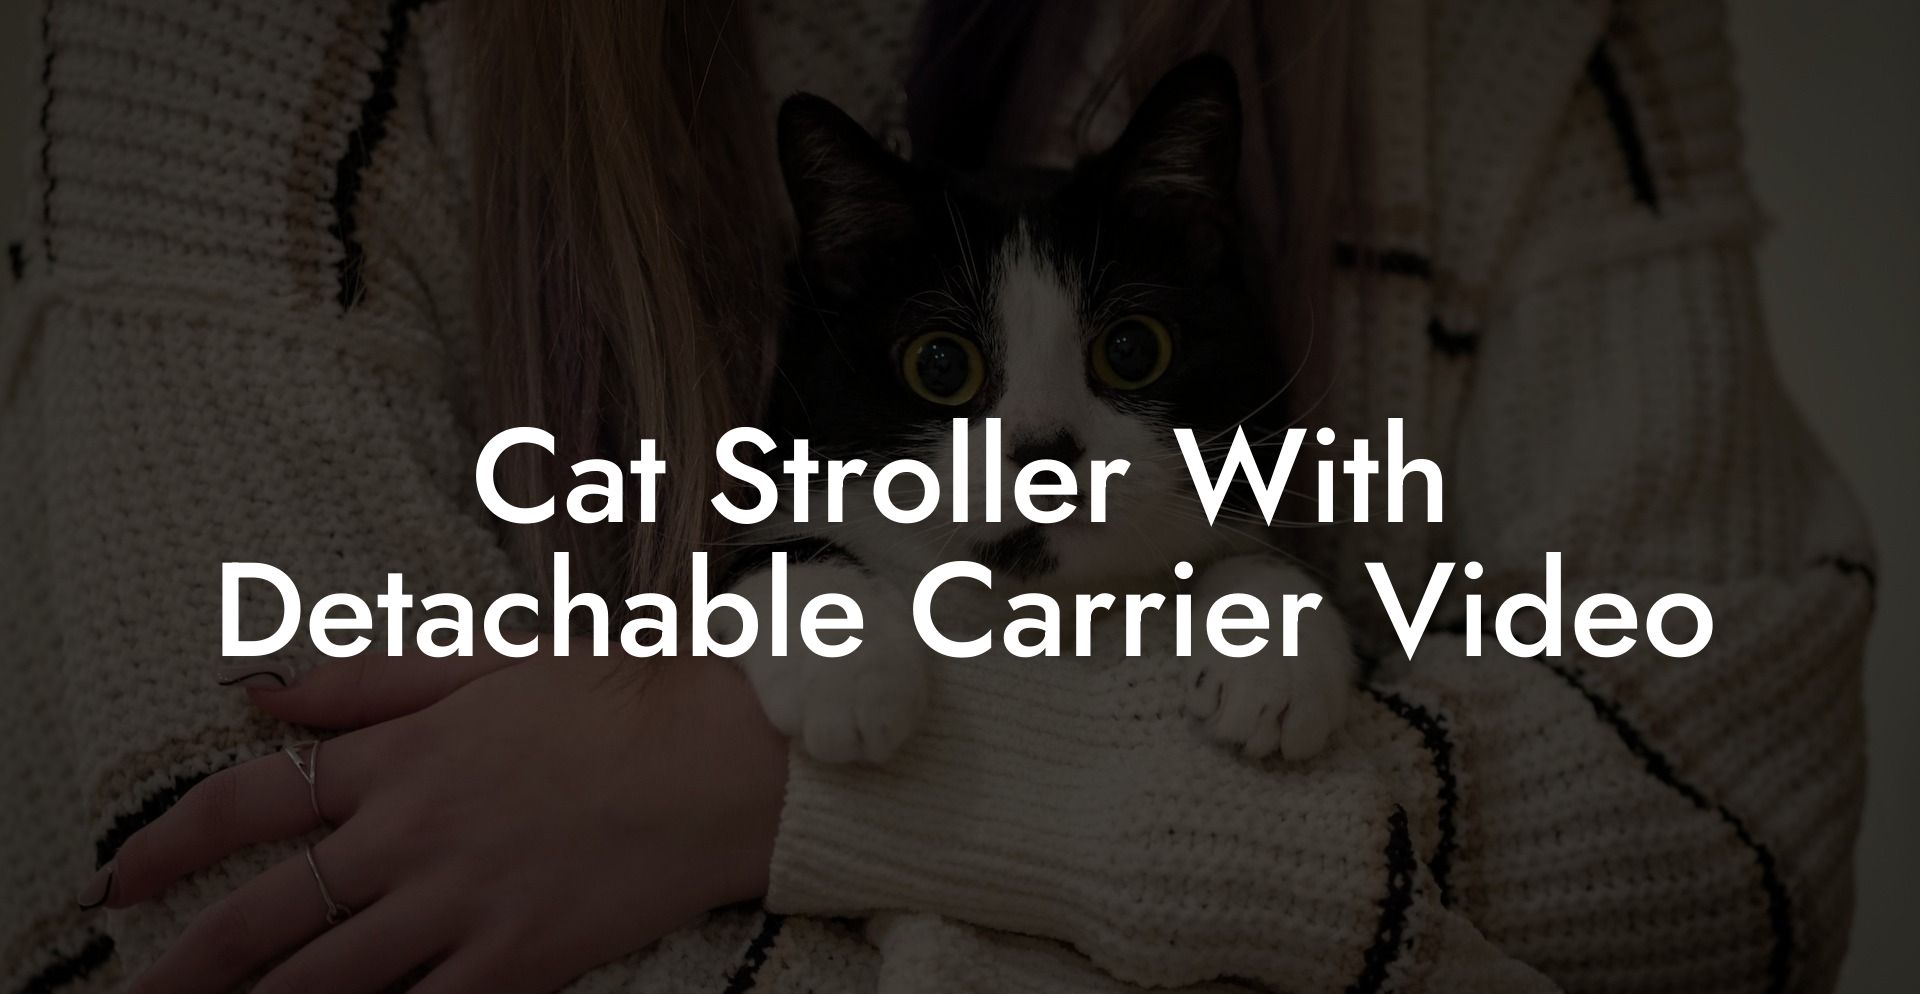 Cat Stroller With Detachable Carrier Video